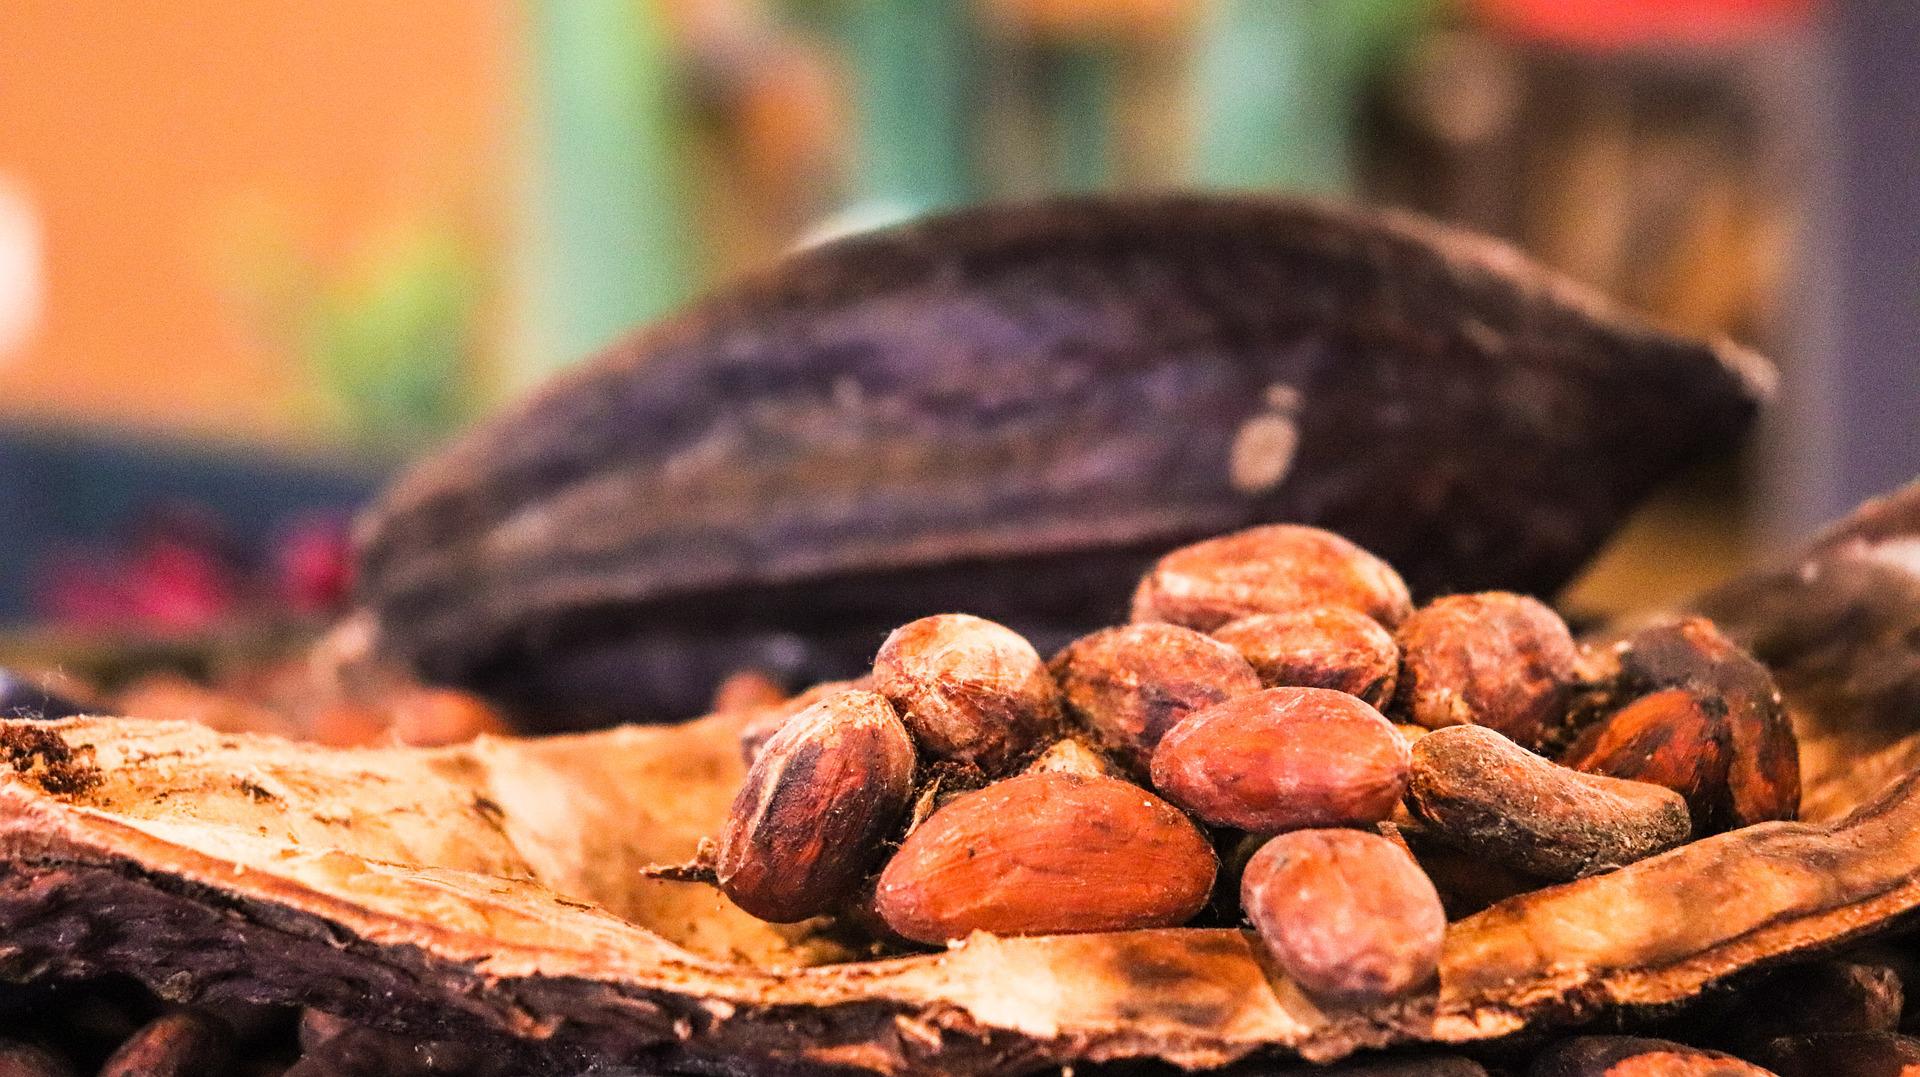 Cacao fruit from the cacao tree